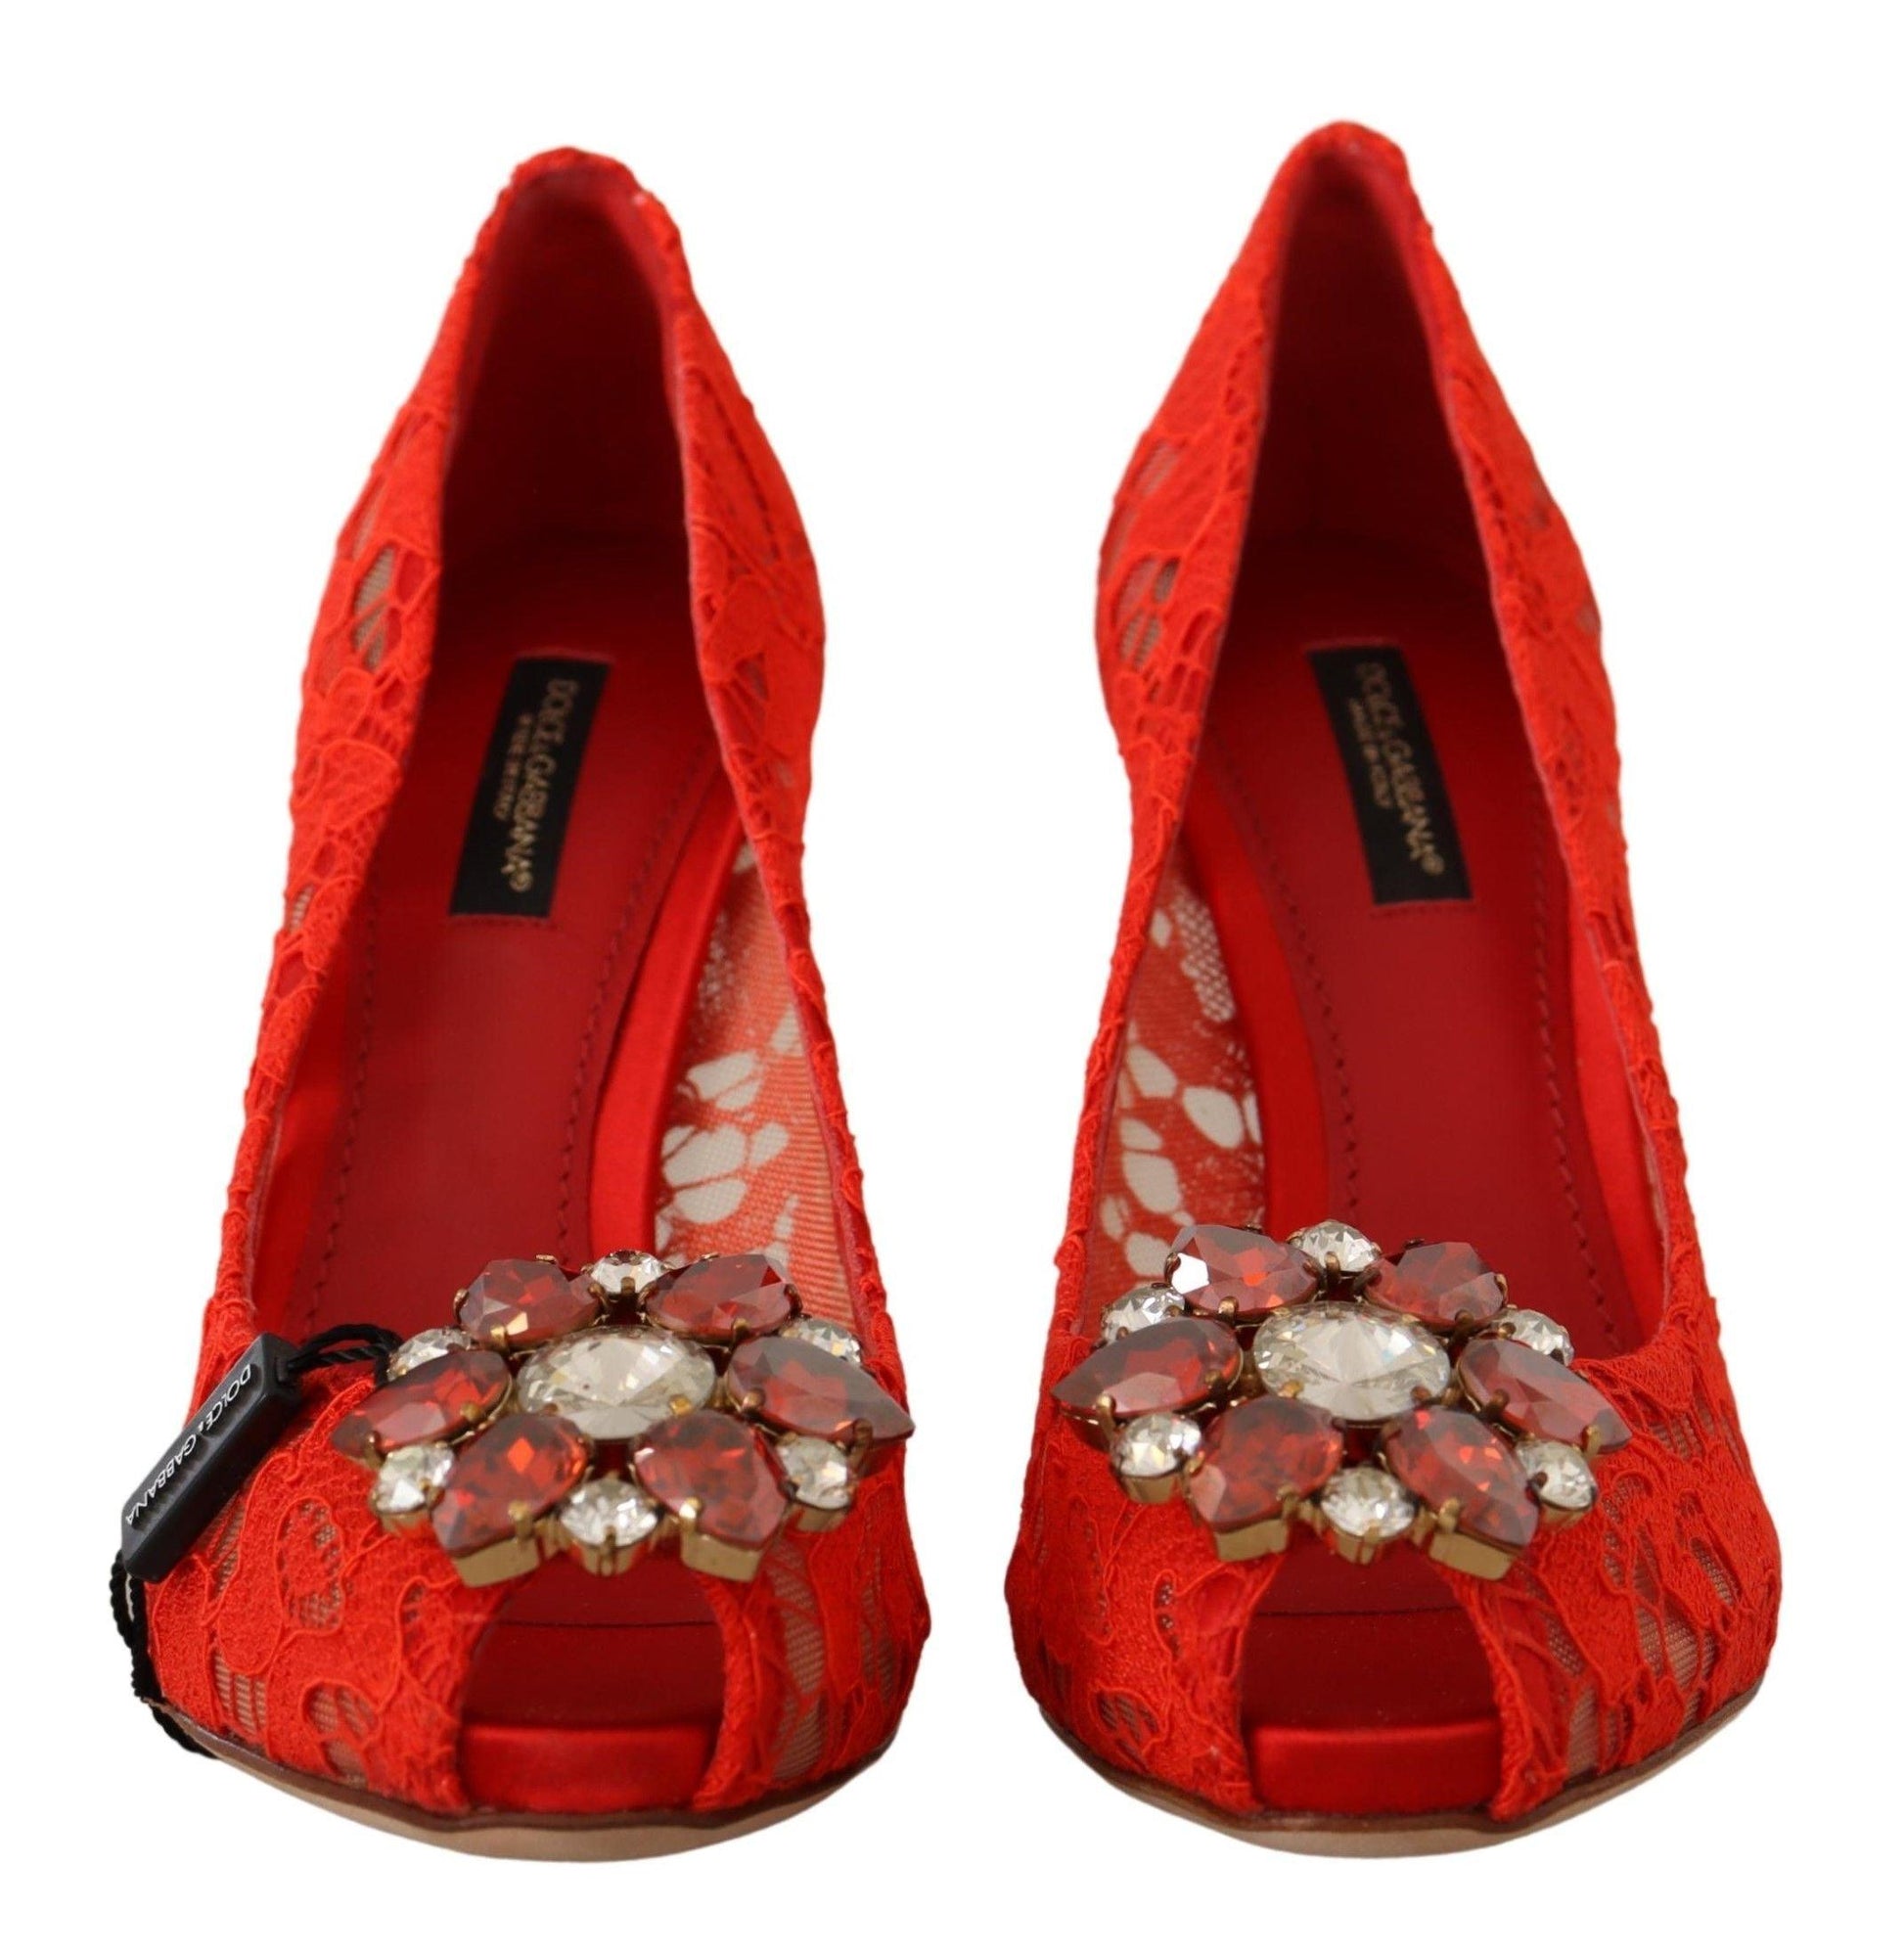 Dolce & Gabbana Red Taormina Lace Crystal Heels Pumps - Designed by Dolce & Gabbana Available to Buy at a Discounted Price on Moon Behind The Hill Online Designer Discount Store